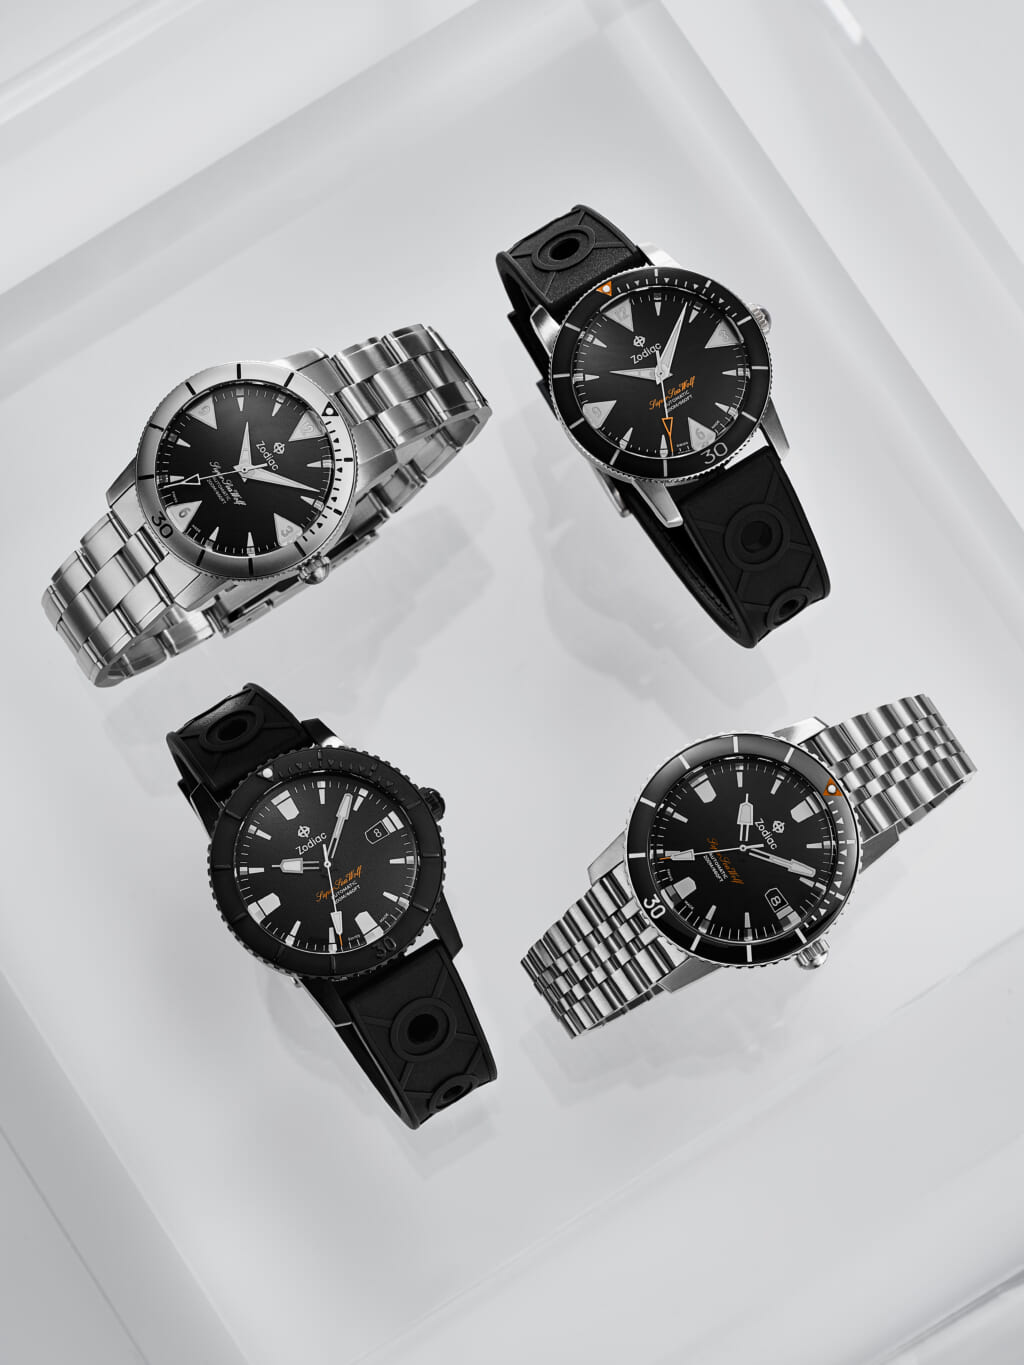 Zodiac watches new Super Sea Wolf "Skin" line of dive watches